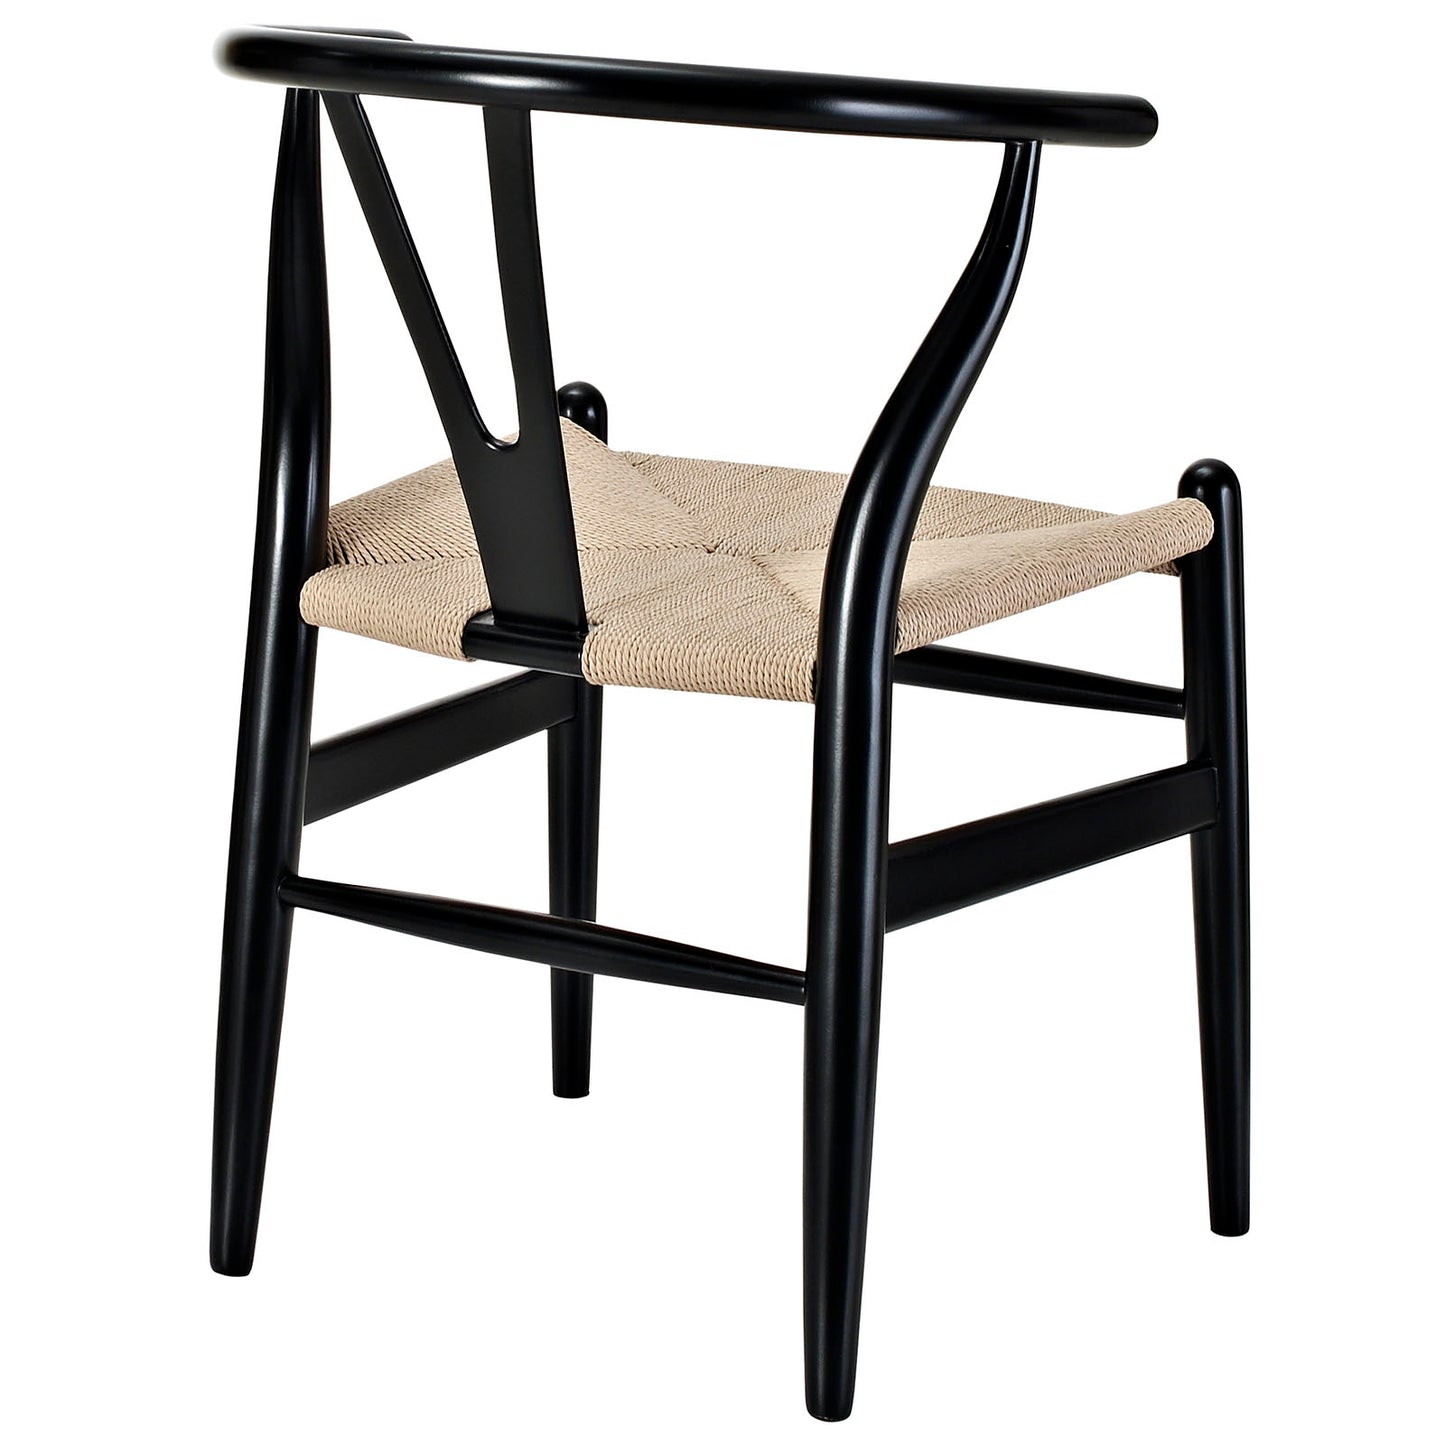 Amish Dining Wood Armchair